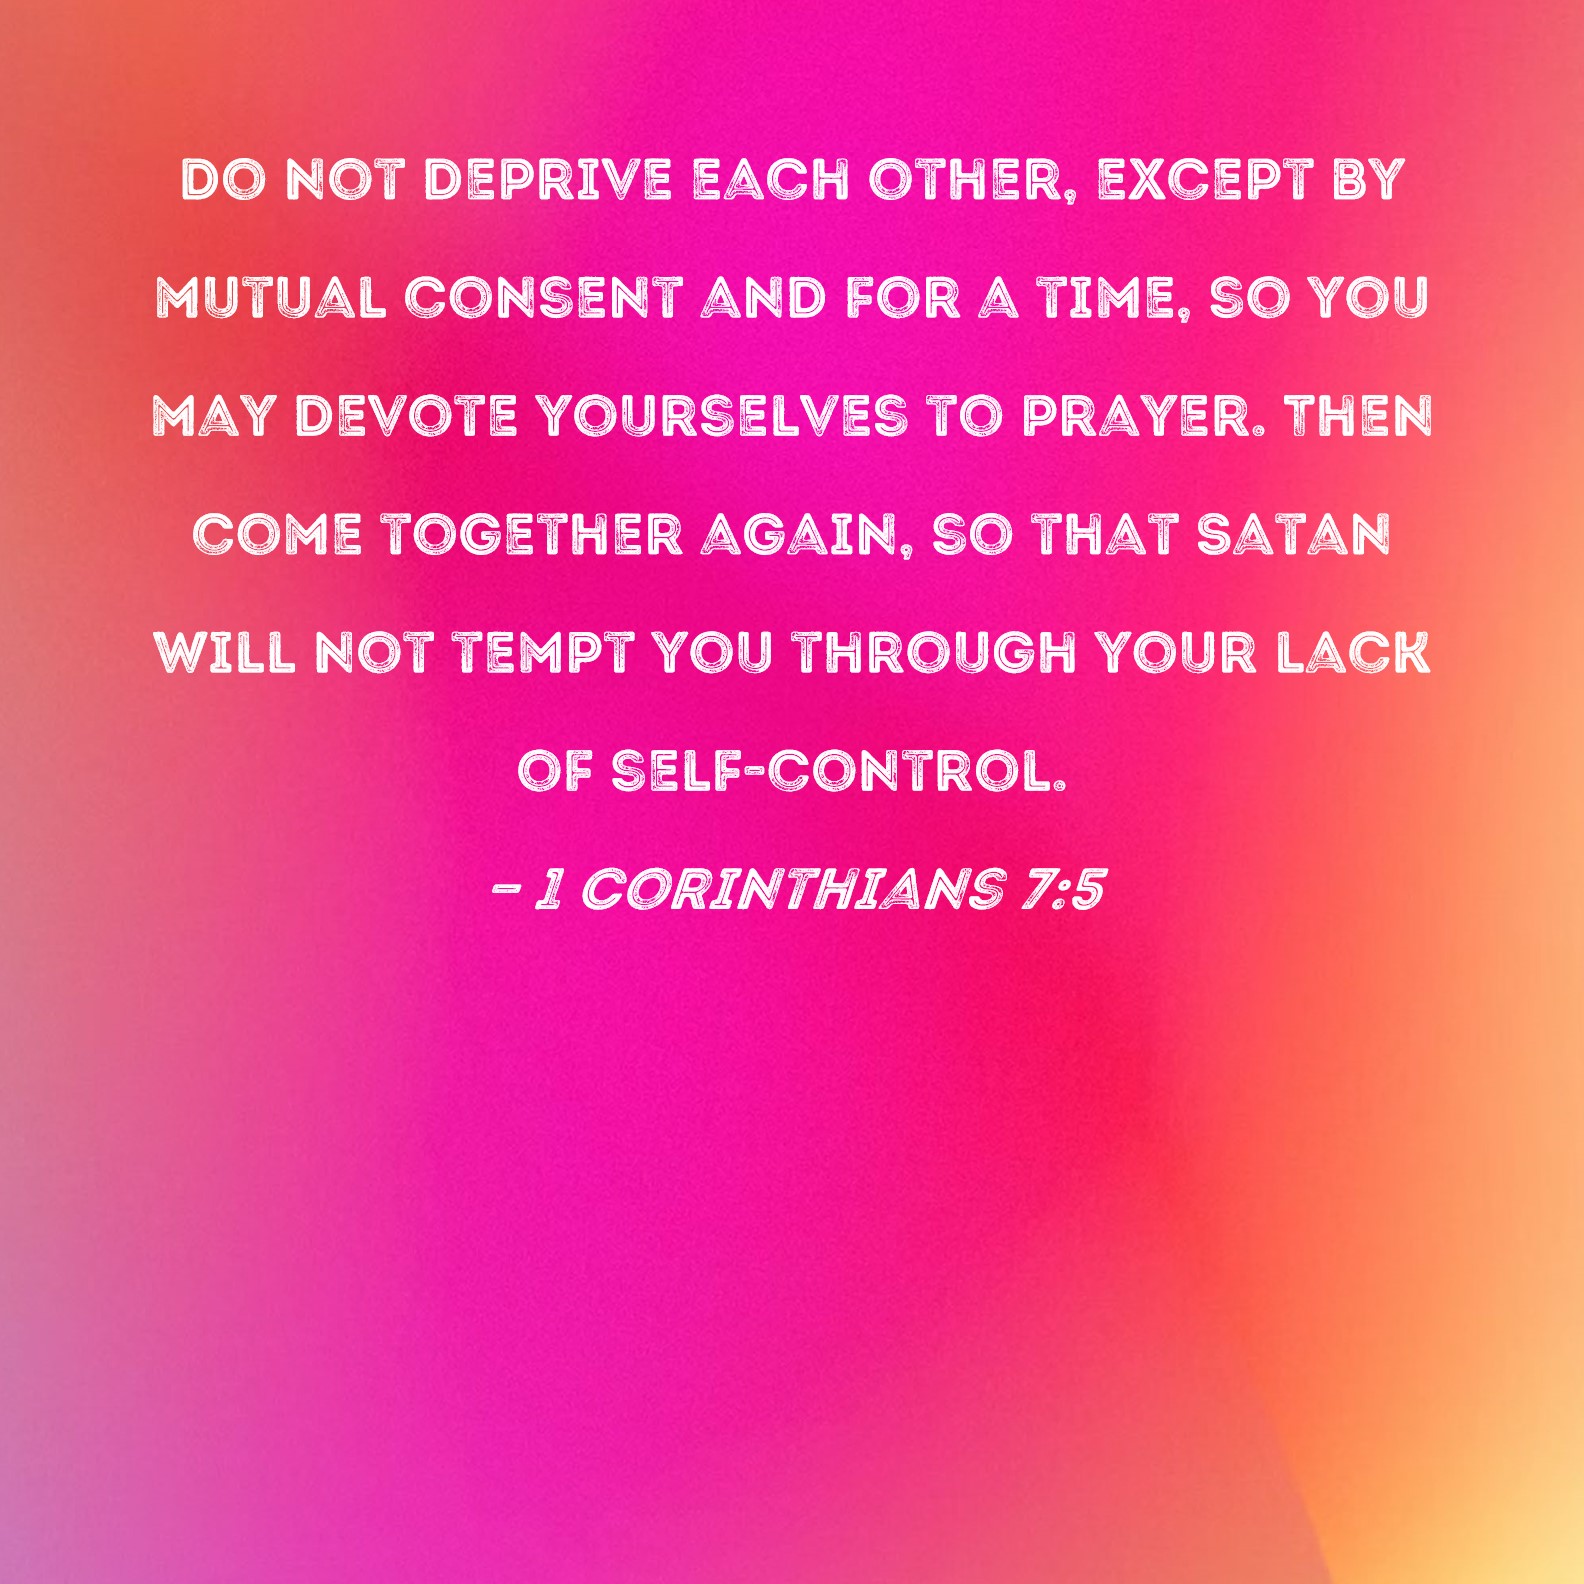 Prayer Time Sex Videos - 1 Corinthians 7:5 Do not deprive each other, except by mutual consent and  for a time, so you may devote yourselves to prayer. Then come together  again, so that Satan will not